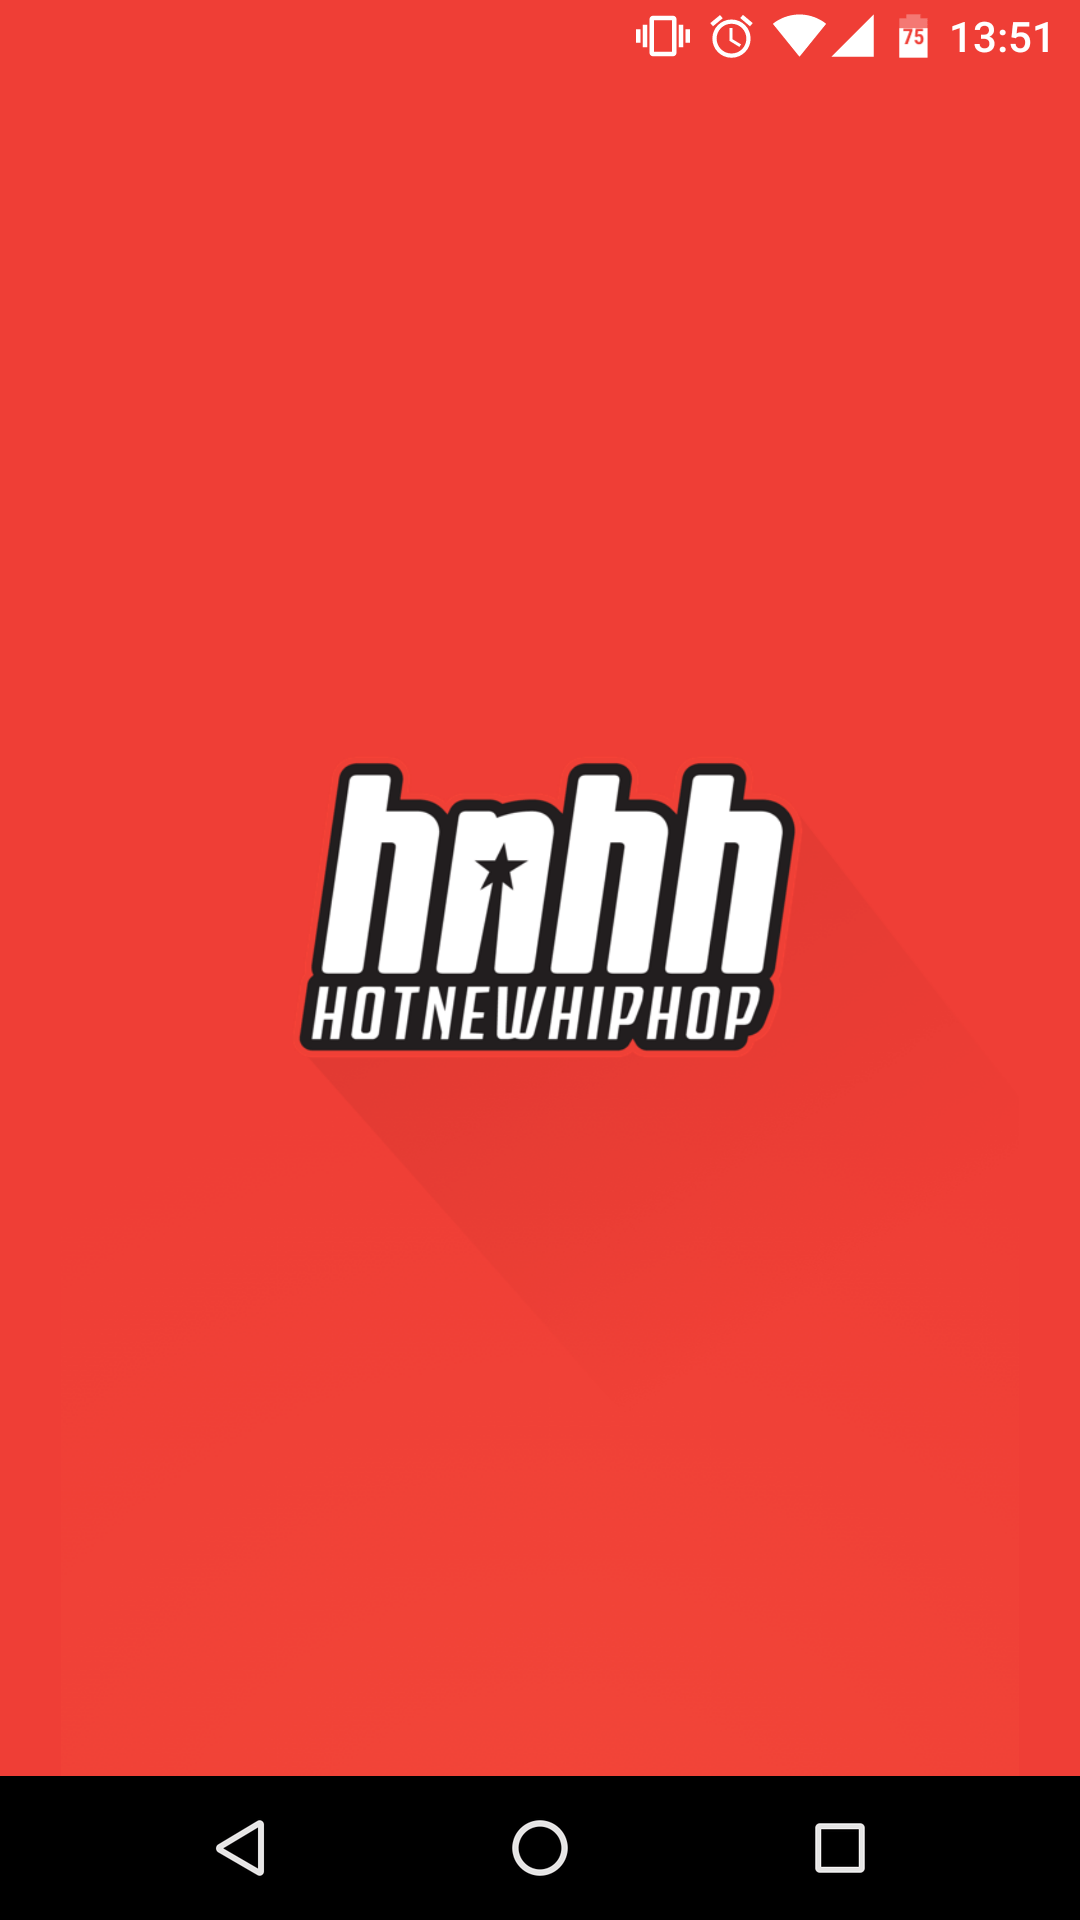 HotNewHipHop Logo - Amazon.com: Hotnewhiphop HNHH: Appstore for Android